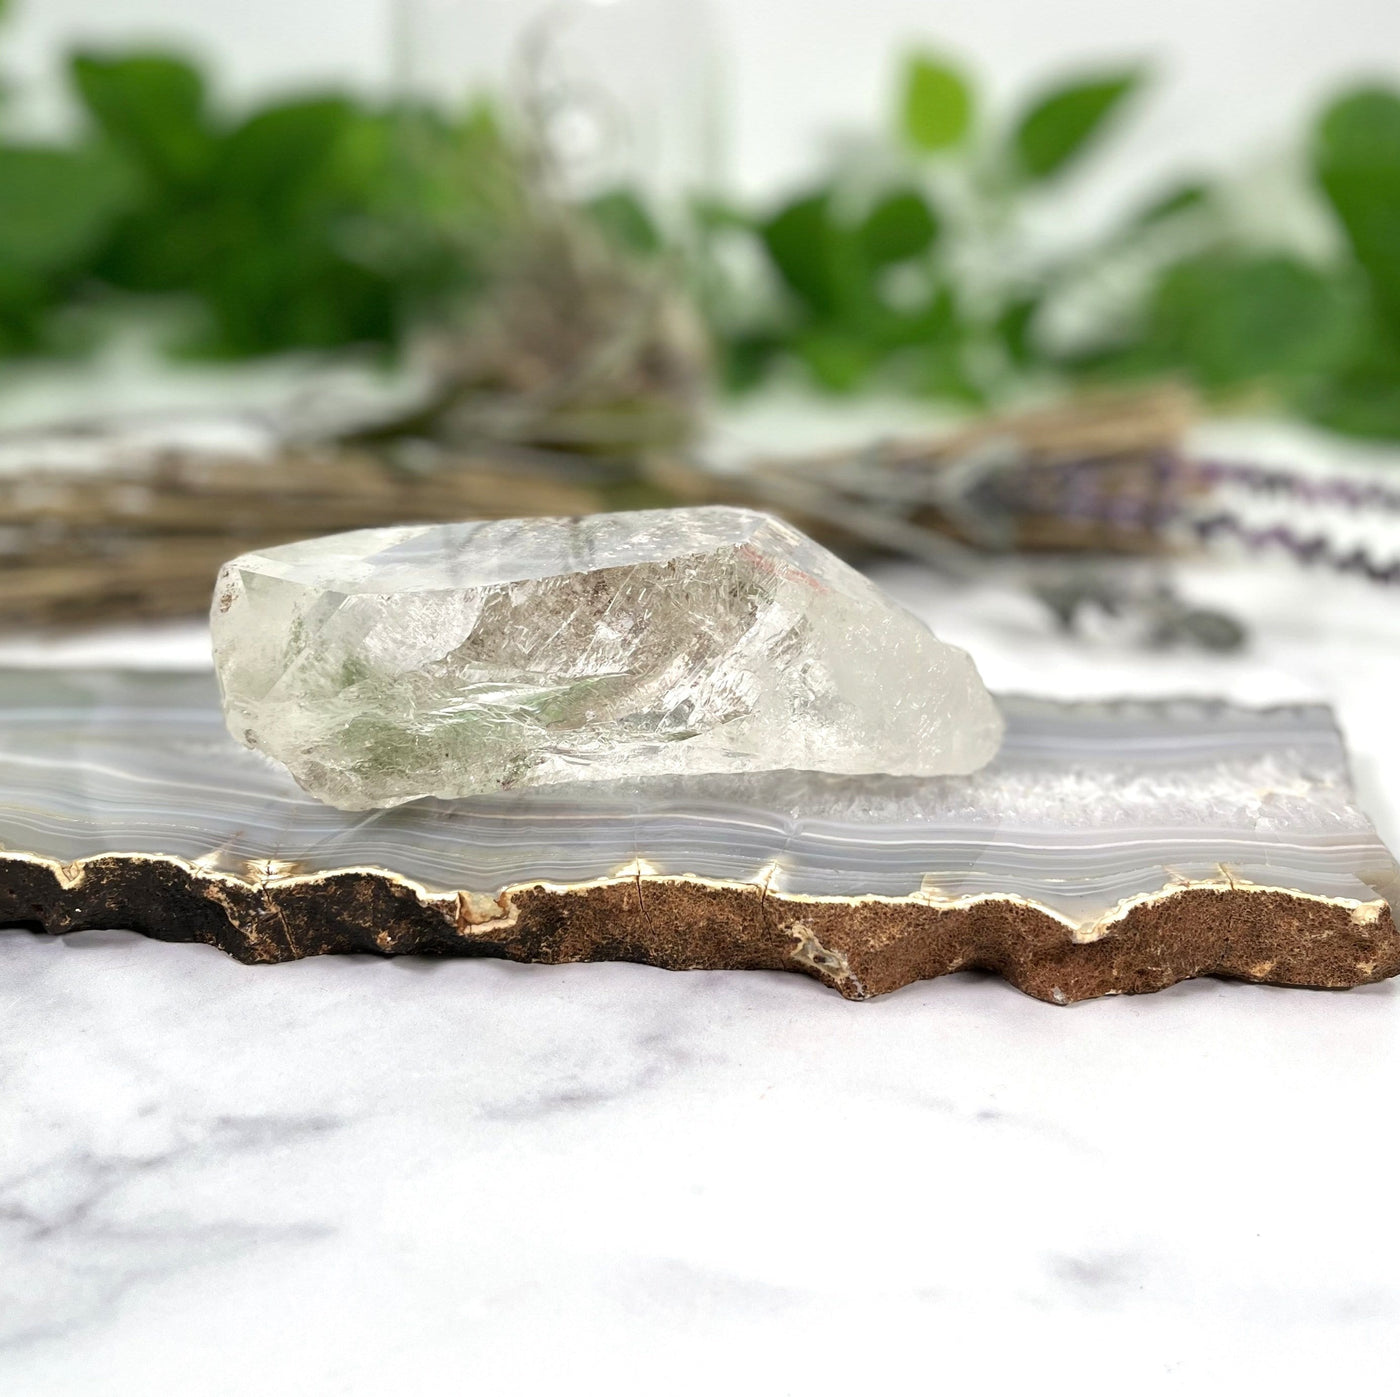 Crystal Quartz with Chlorite with decorations in the background